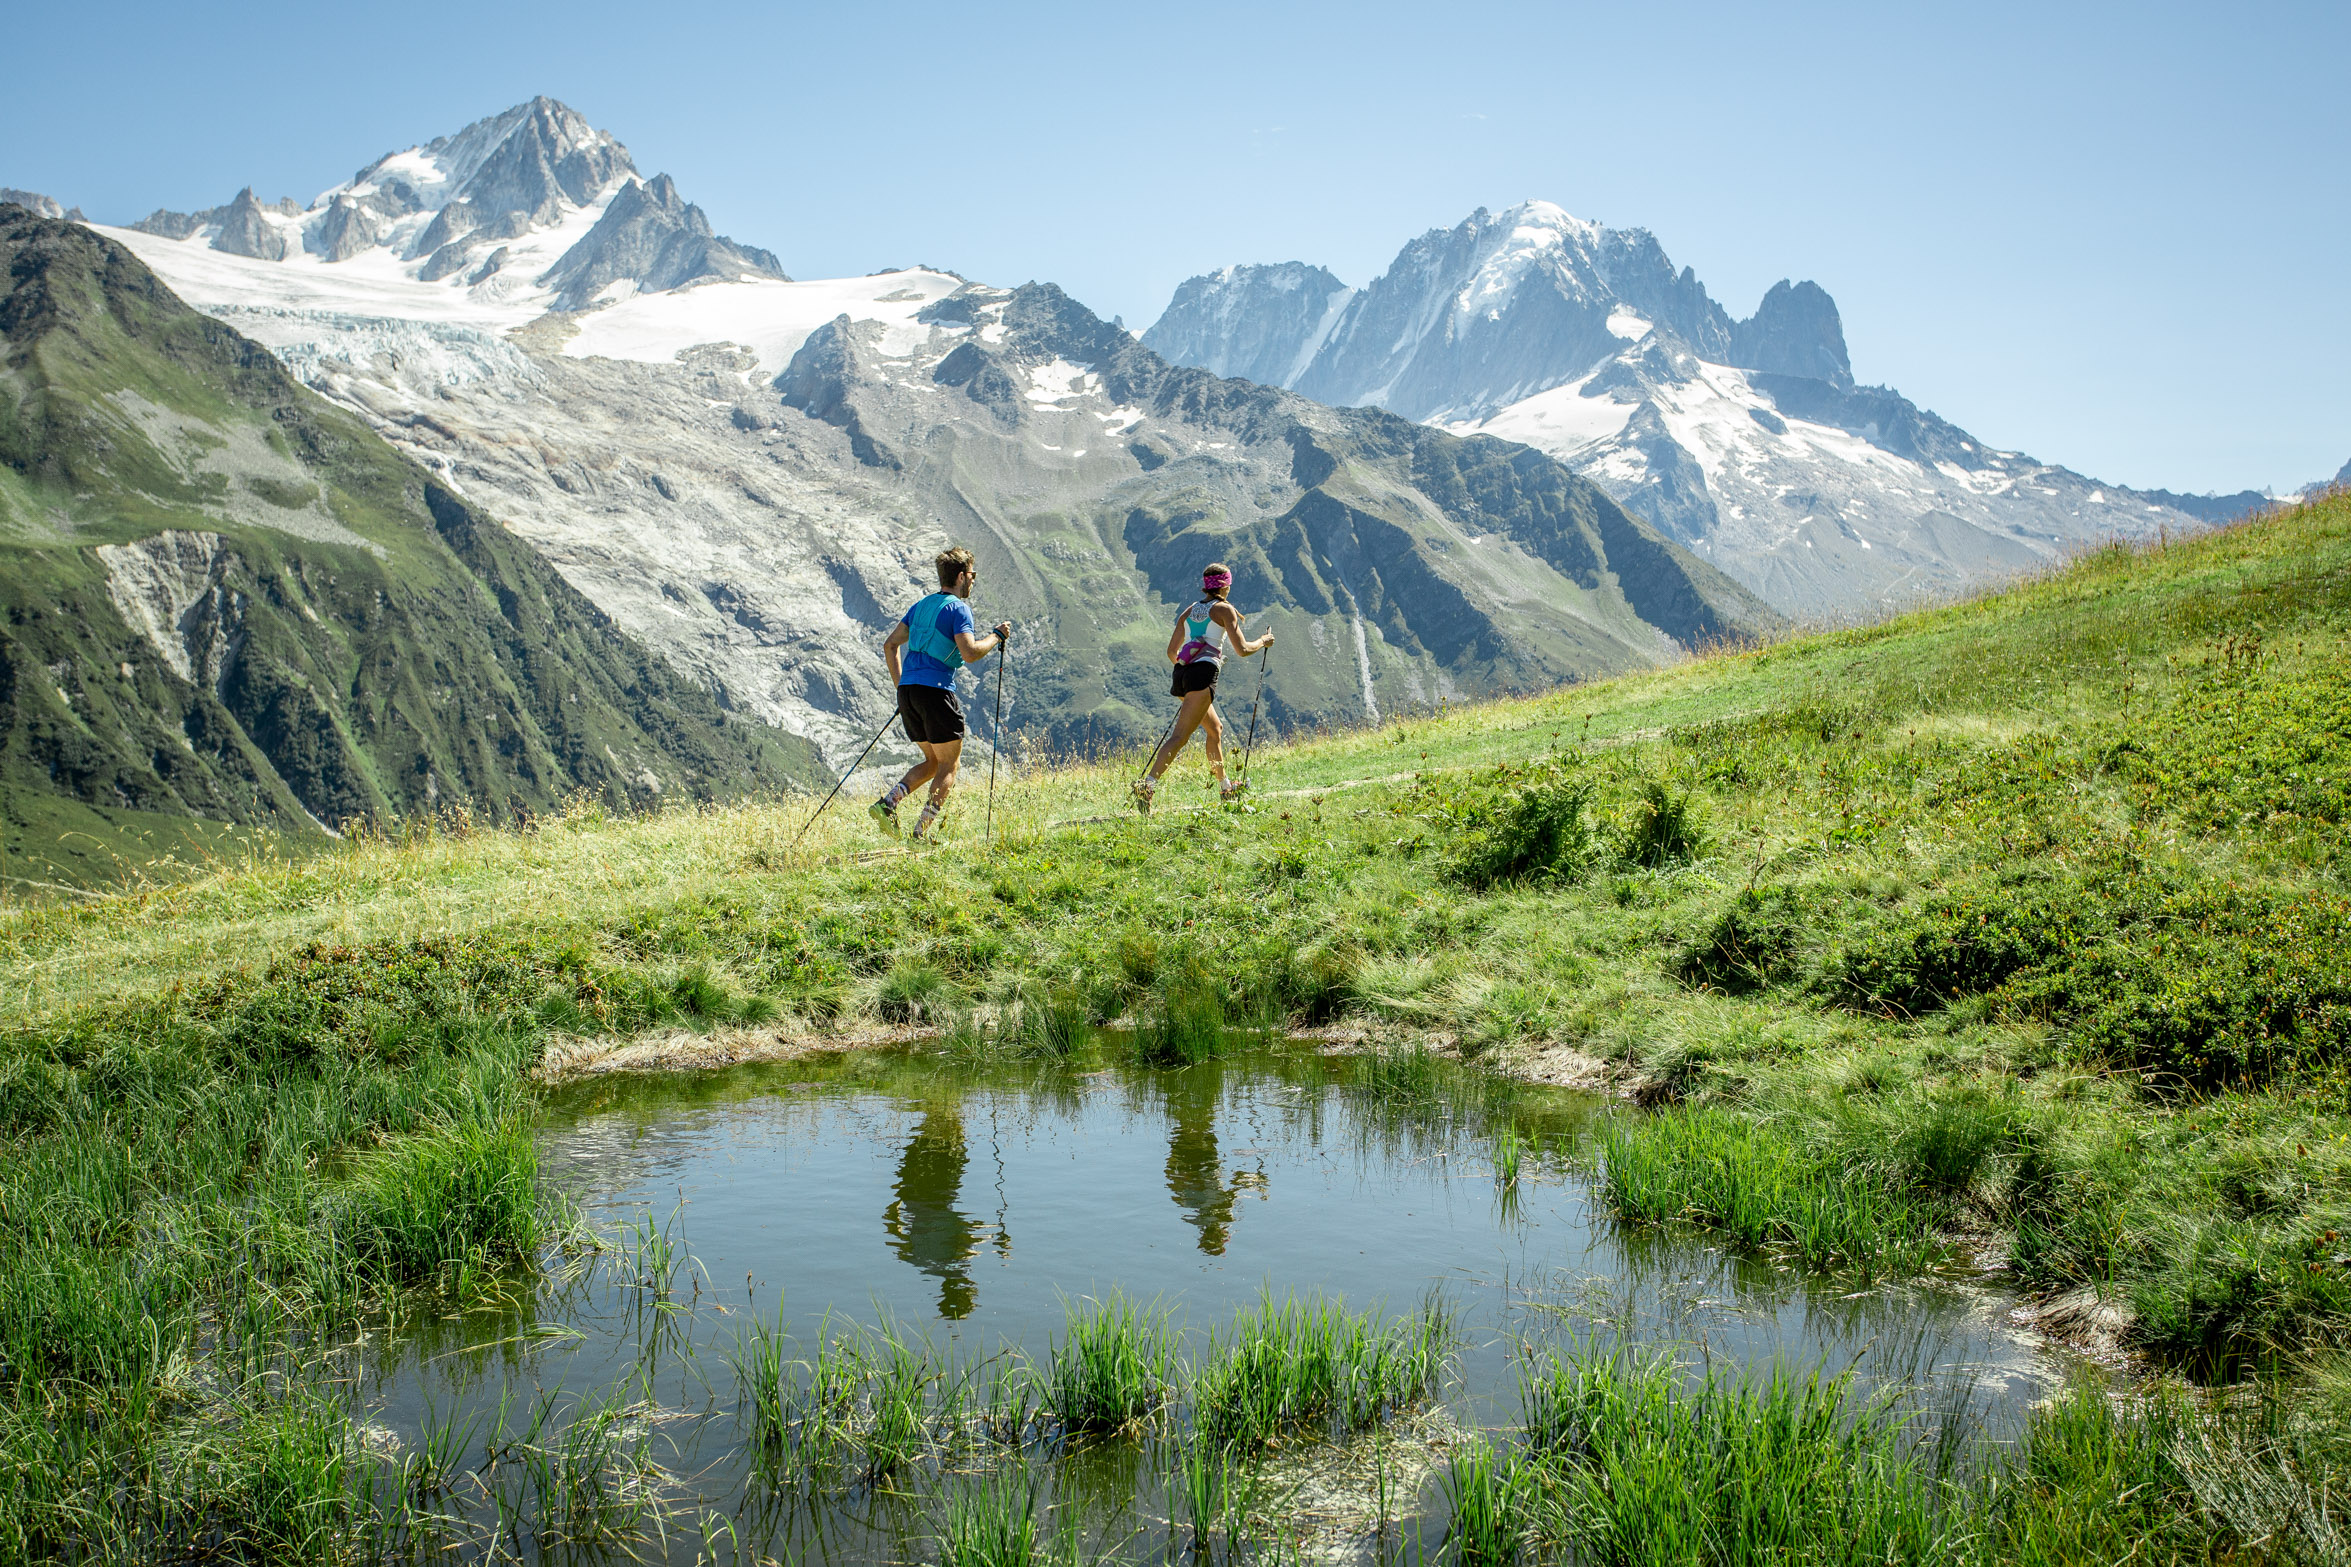 two mountain runners/speed hikers with sticks make a quick ascent, their reflection in a small mountain lake in the foreground, the snowy peaks of high mountains behind then, as they run along a grassy trail